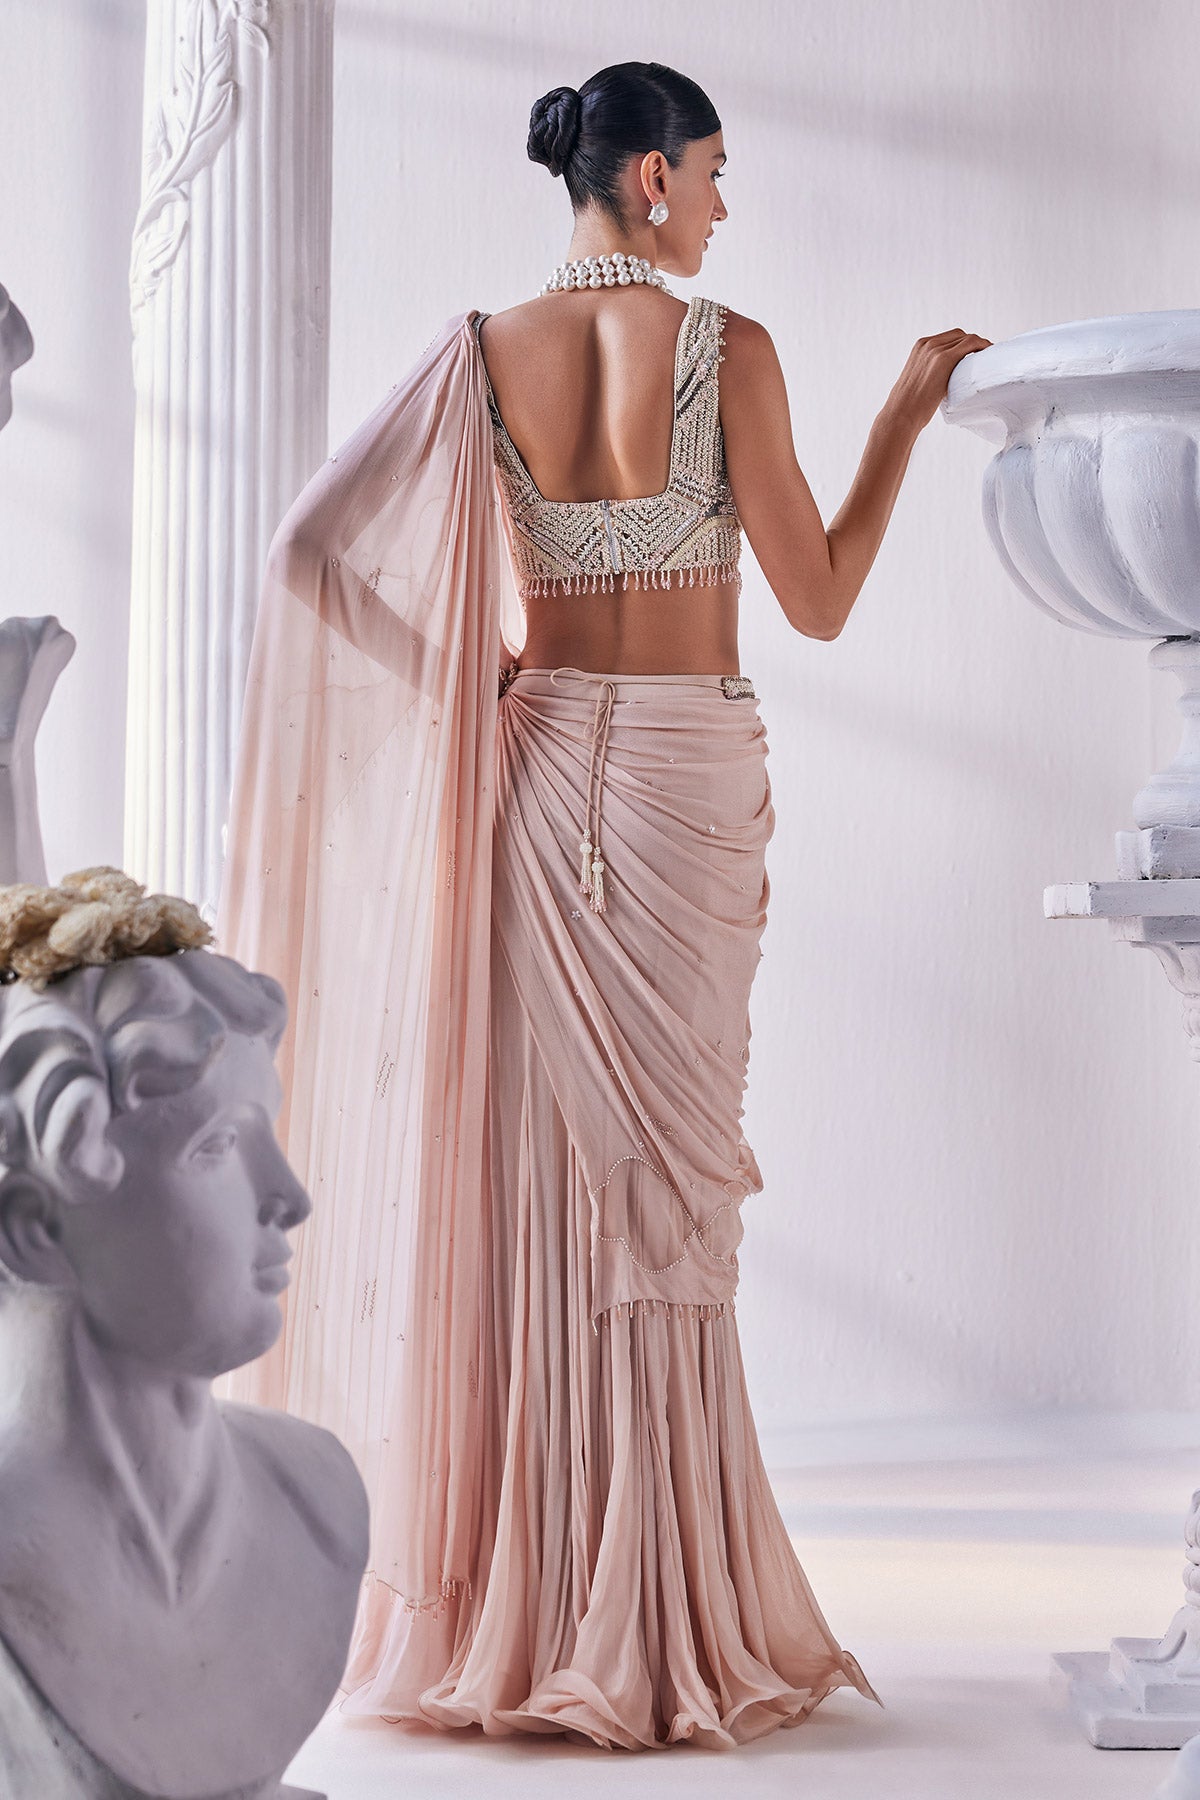 Peach Chiffon Drape Saree With Bead Work Detail Paired With A Heavy Emroidered Blouse And A Belt.